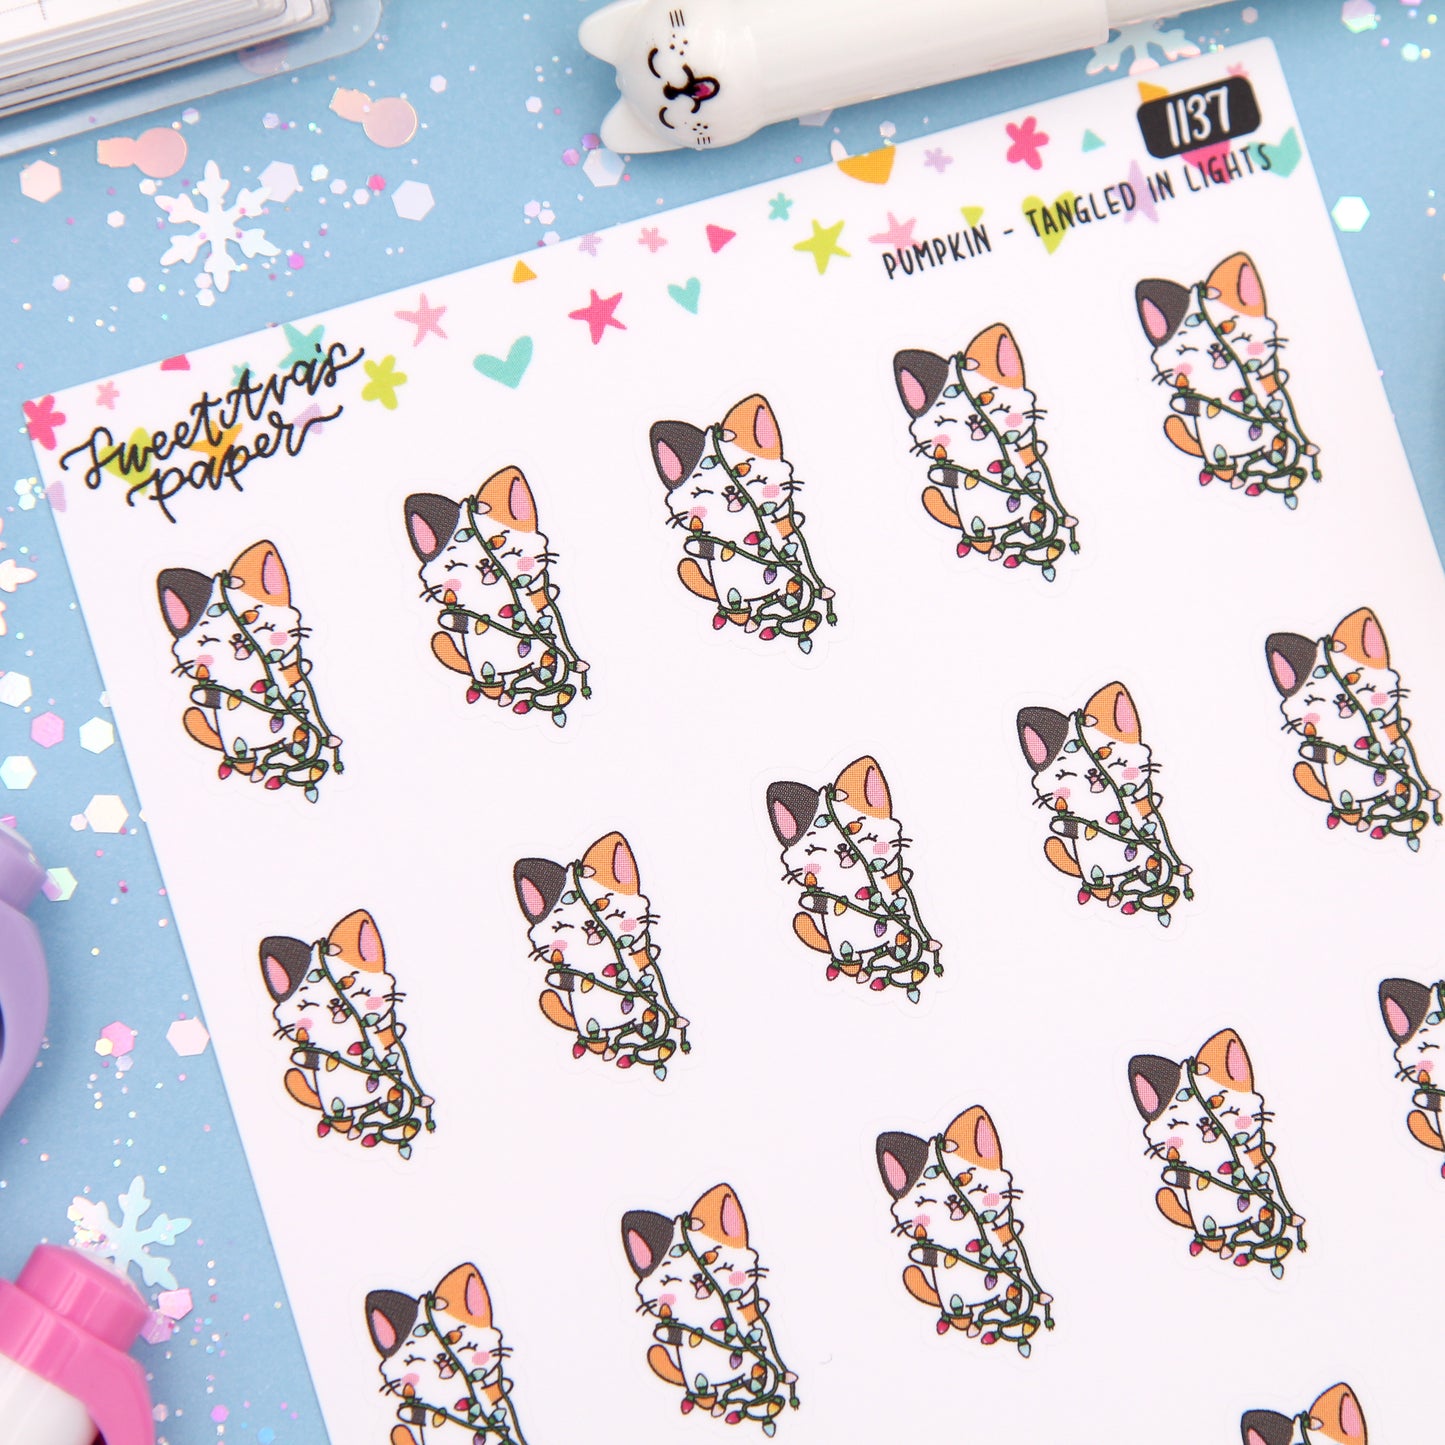 Tangled In Holiday Lights Planner Stickers - Pumpkin The Cat - [1137]